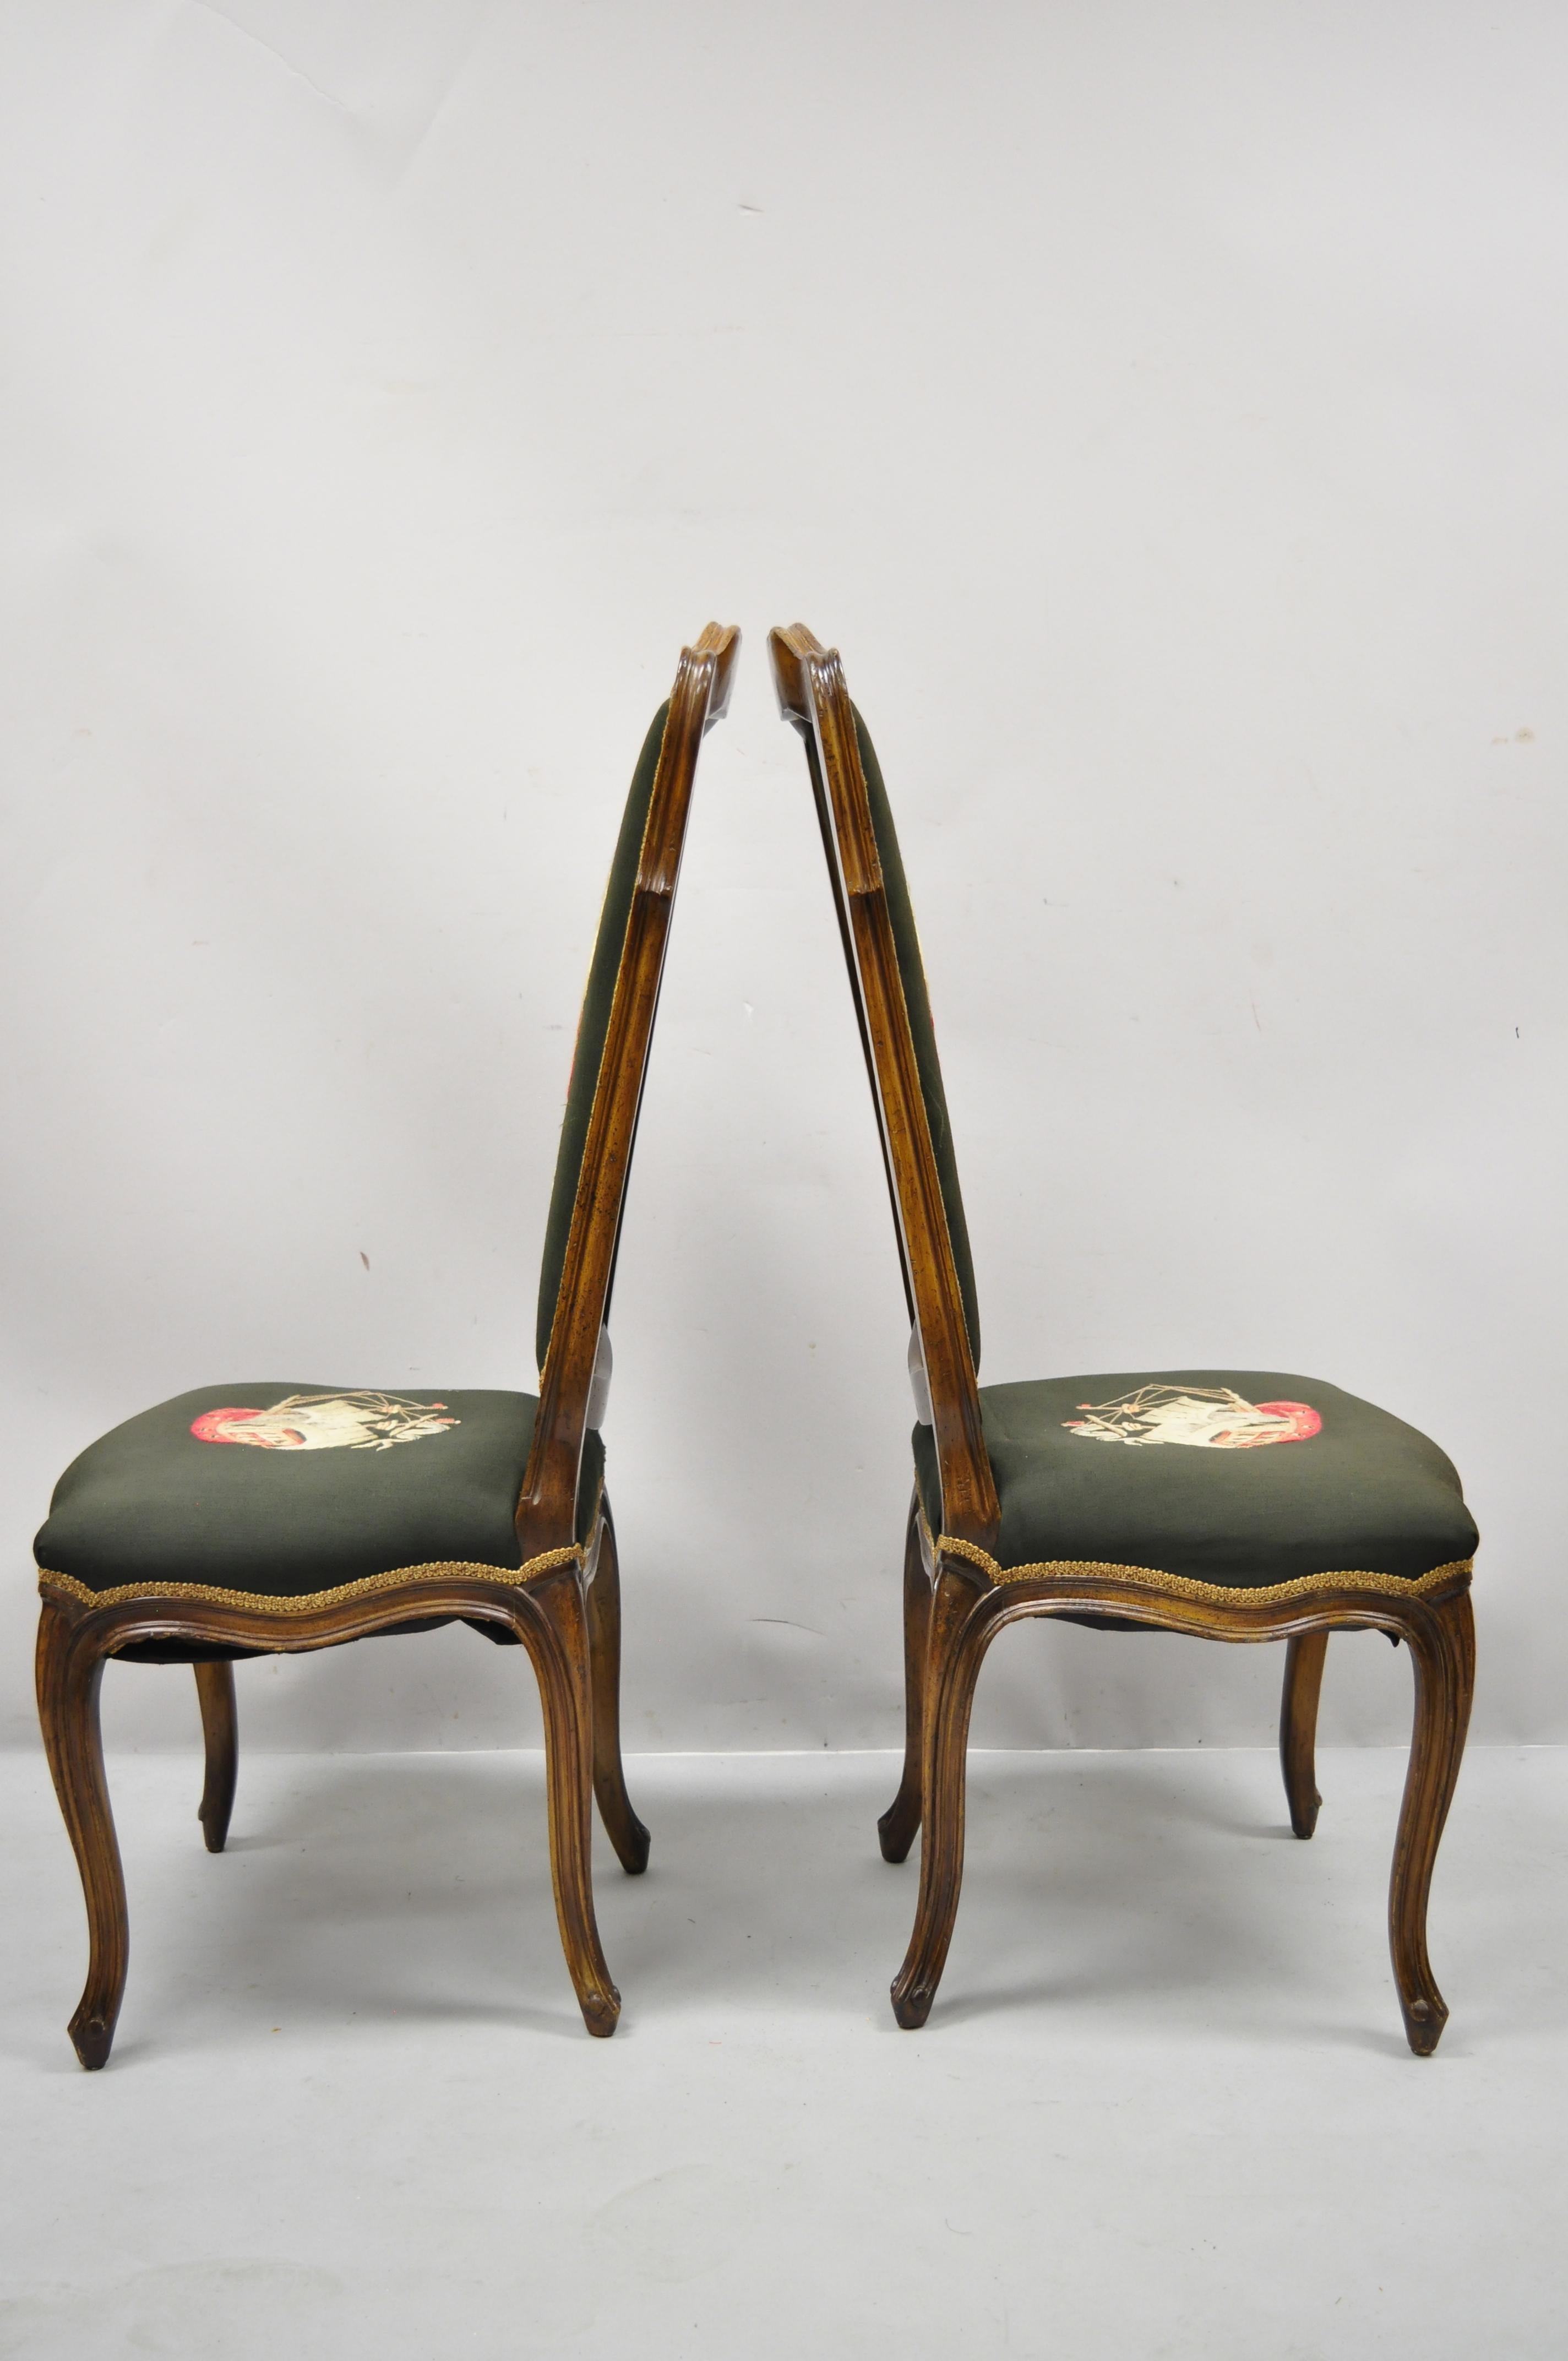 French Provincial Louis XV Walnut Side Chairs w/ Ship Boat Crewel Work, a Pair For Sale 3